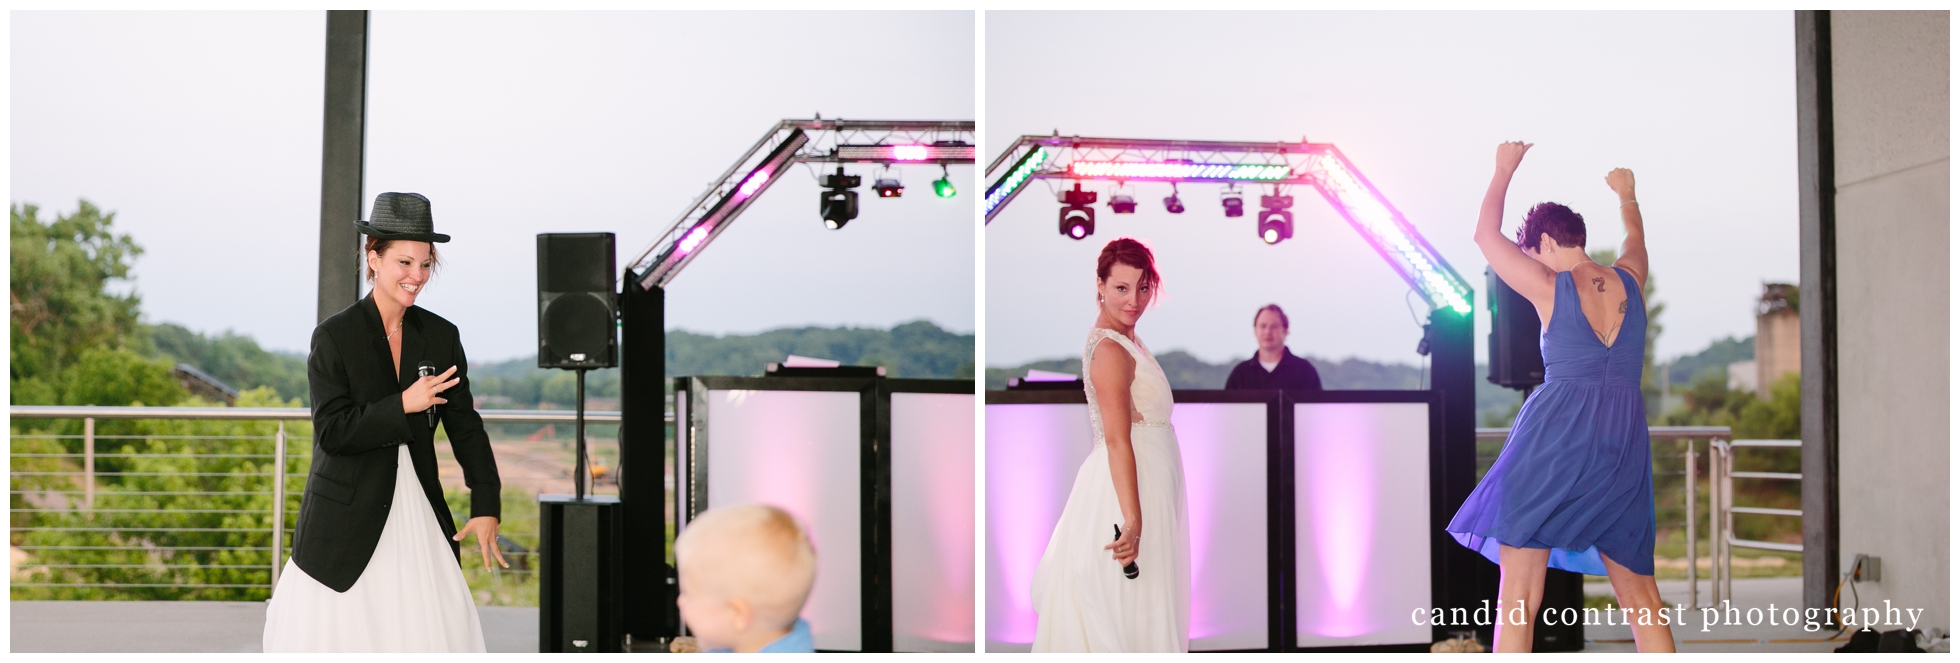 bride and groom lip-sync battle at a bellevue iowa outdoor wedding at the shore event center, iowa wedding photographer candid contrast photography